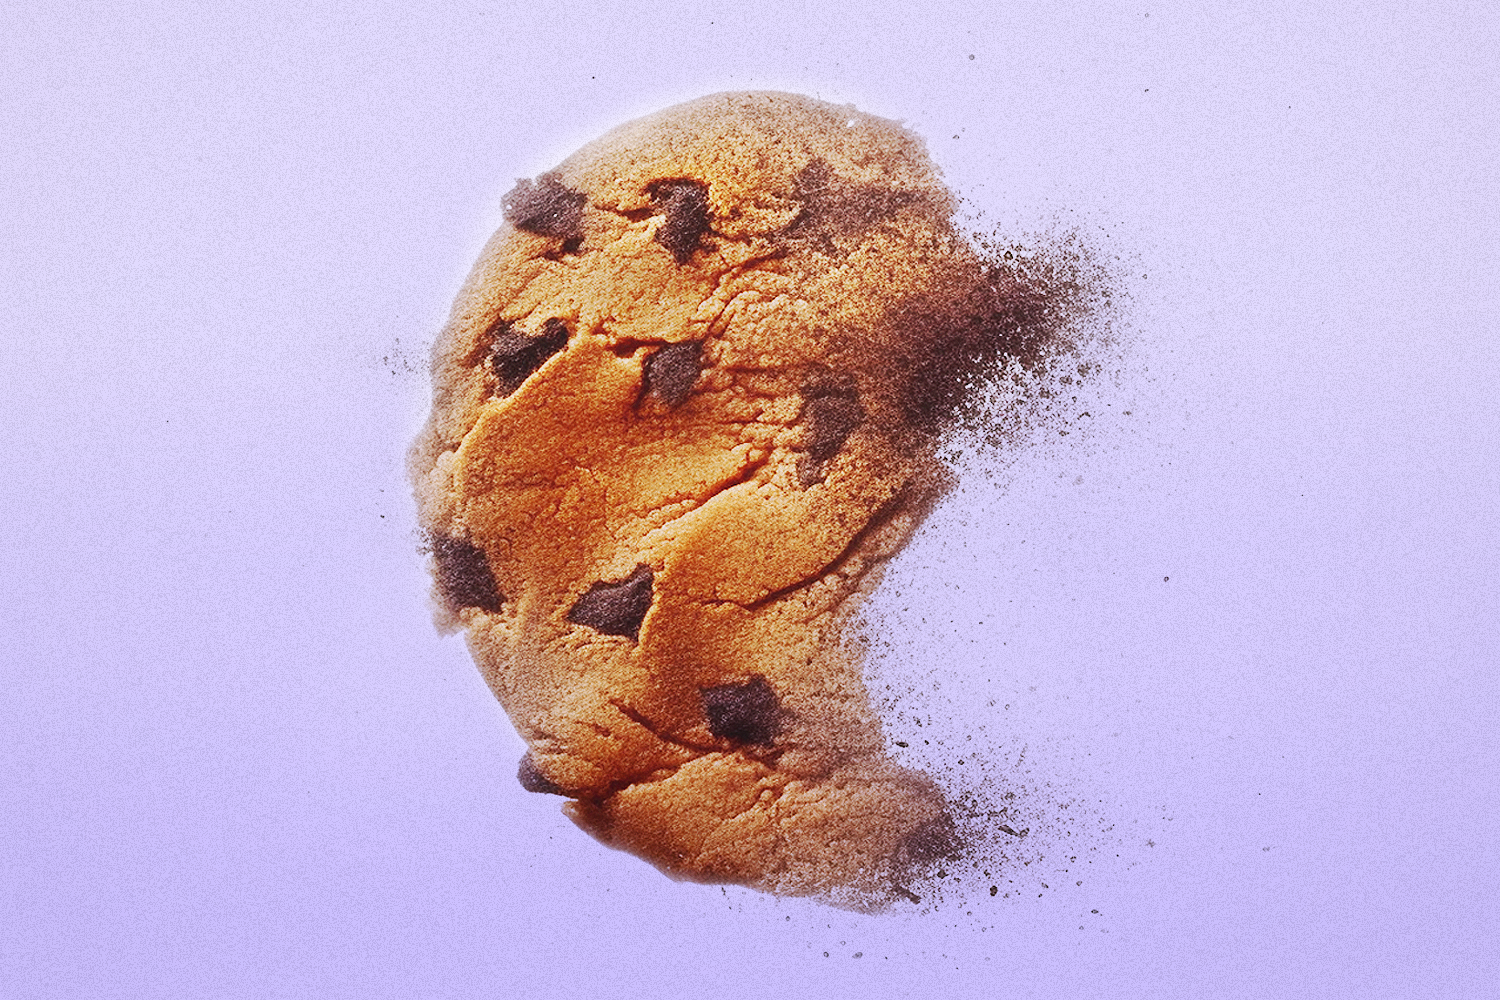 A chocolate chip cookie disappearing in to thin air on a light purple backdrop